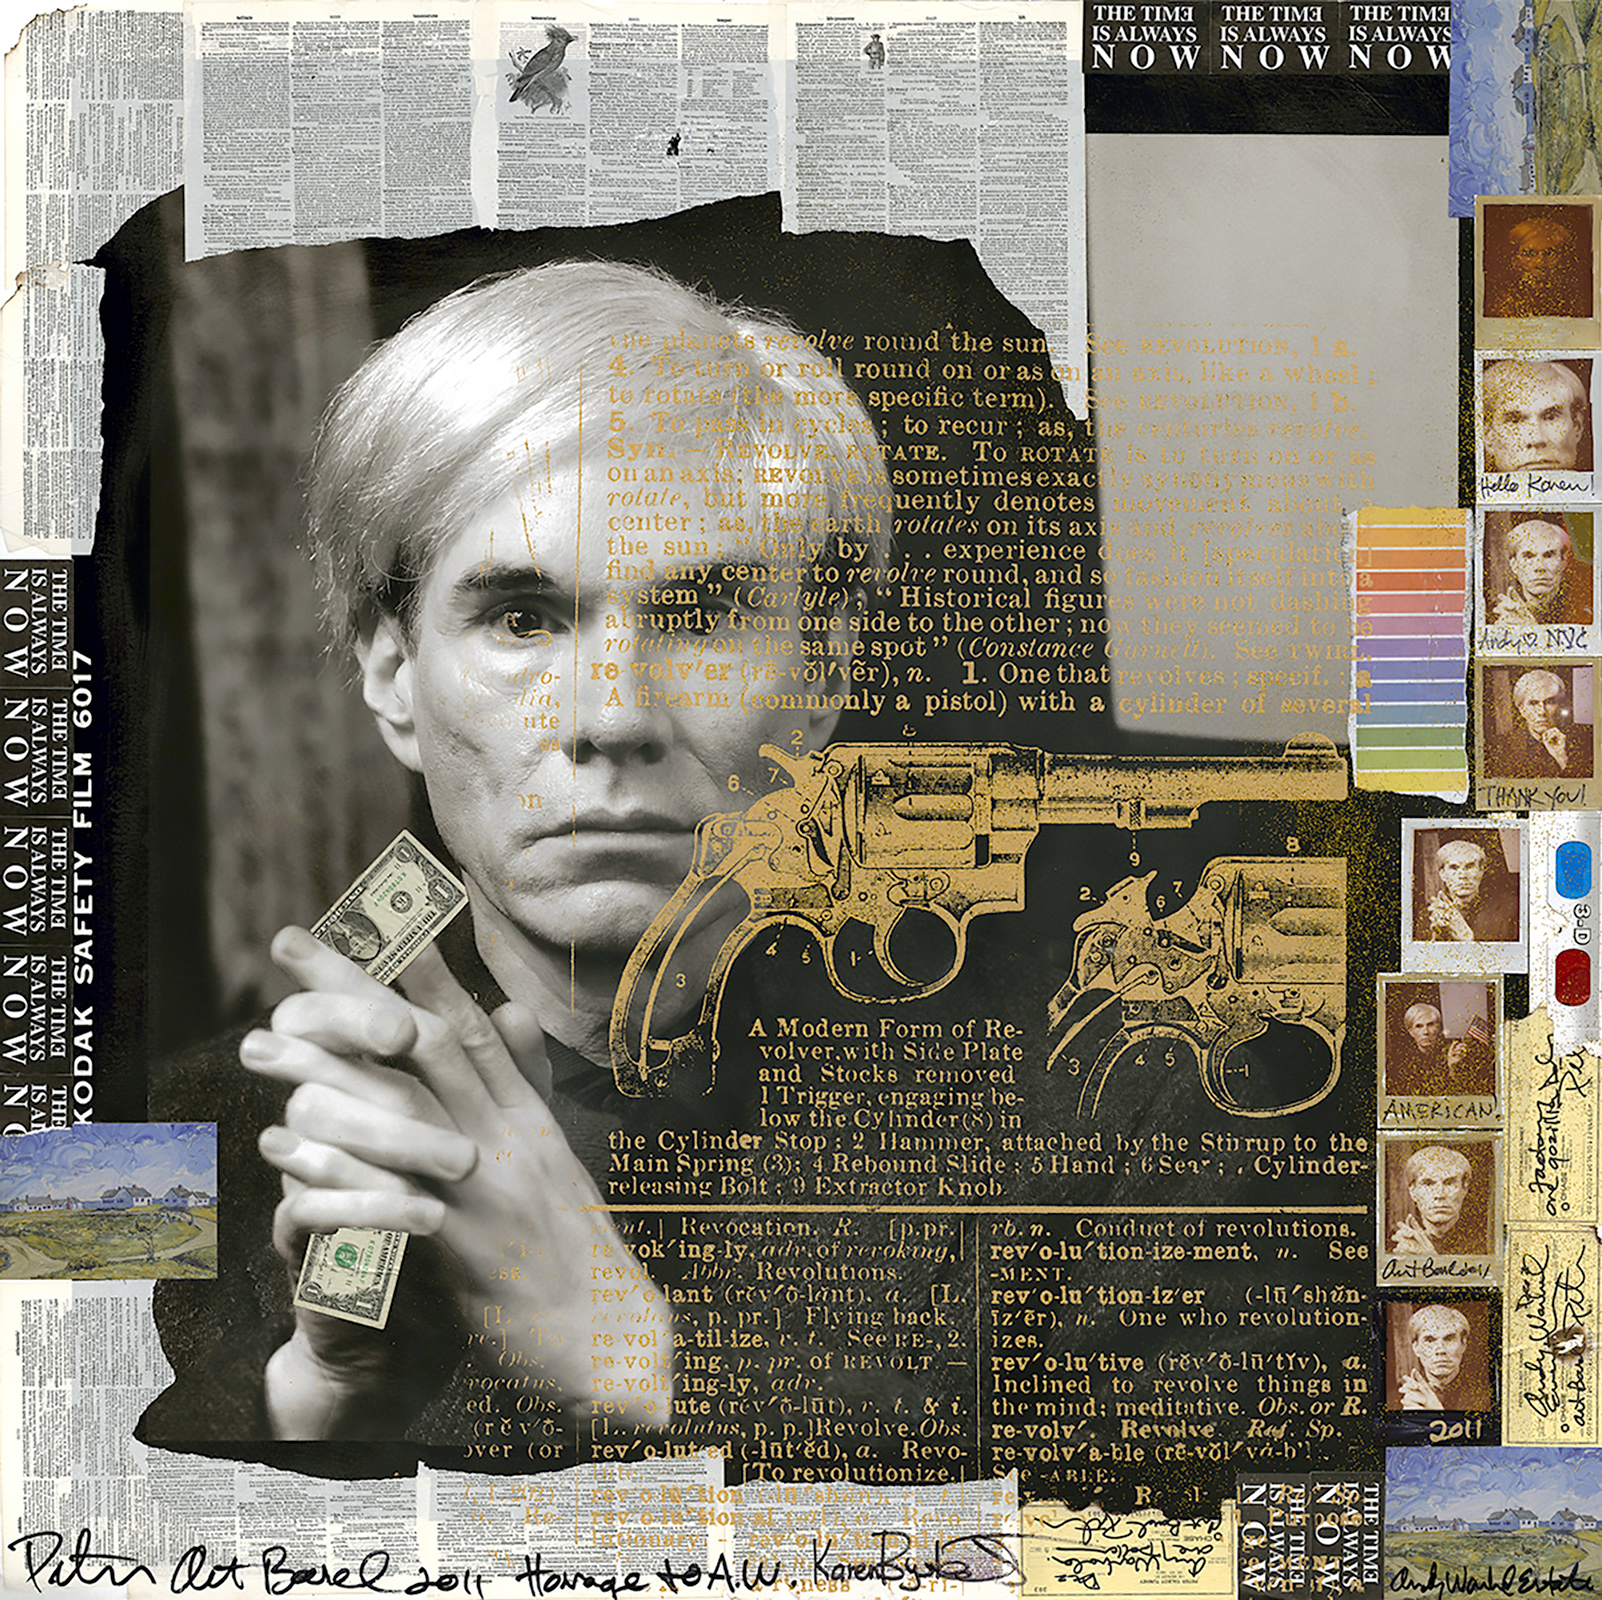  Karen Bystedt x Peter Tunney -  Andy with Golden Gun   Mixed Media, 27 x 27 inches 